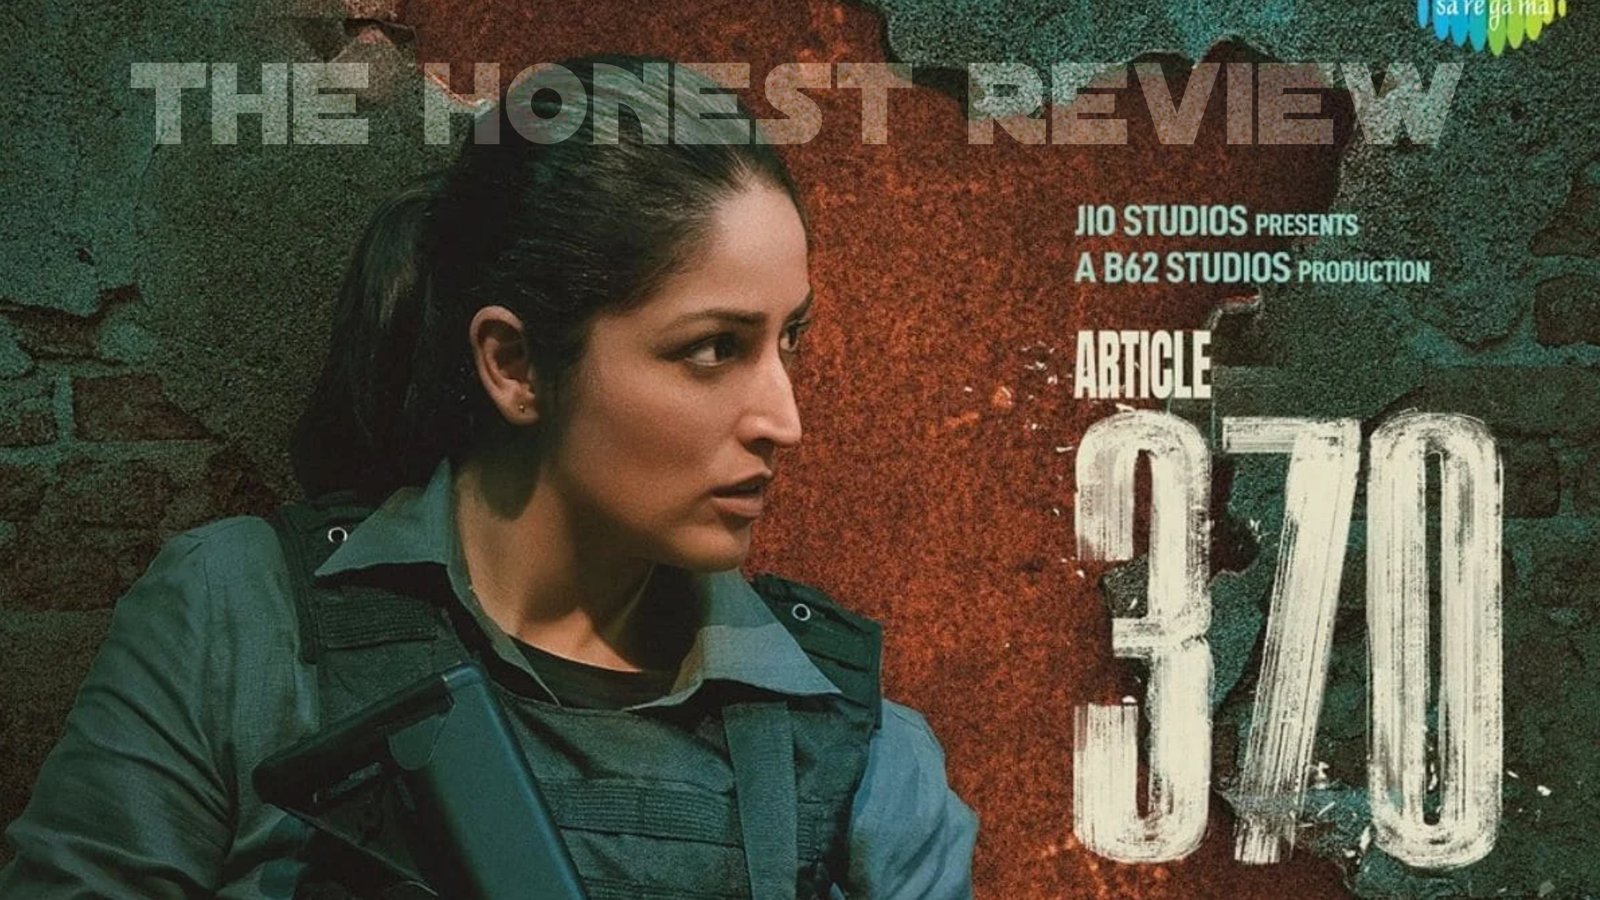 Article 370 Movie Review and Box Office Collection